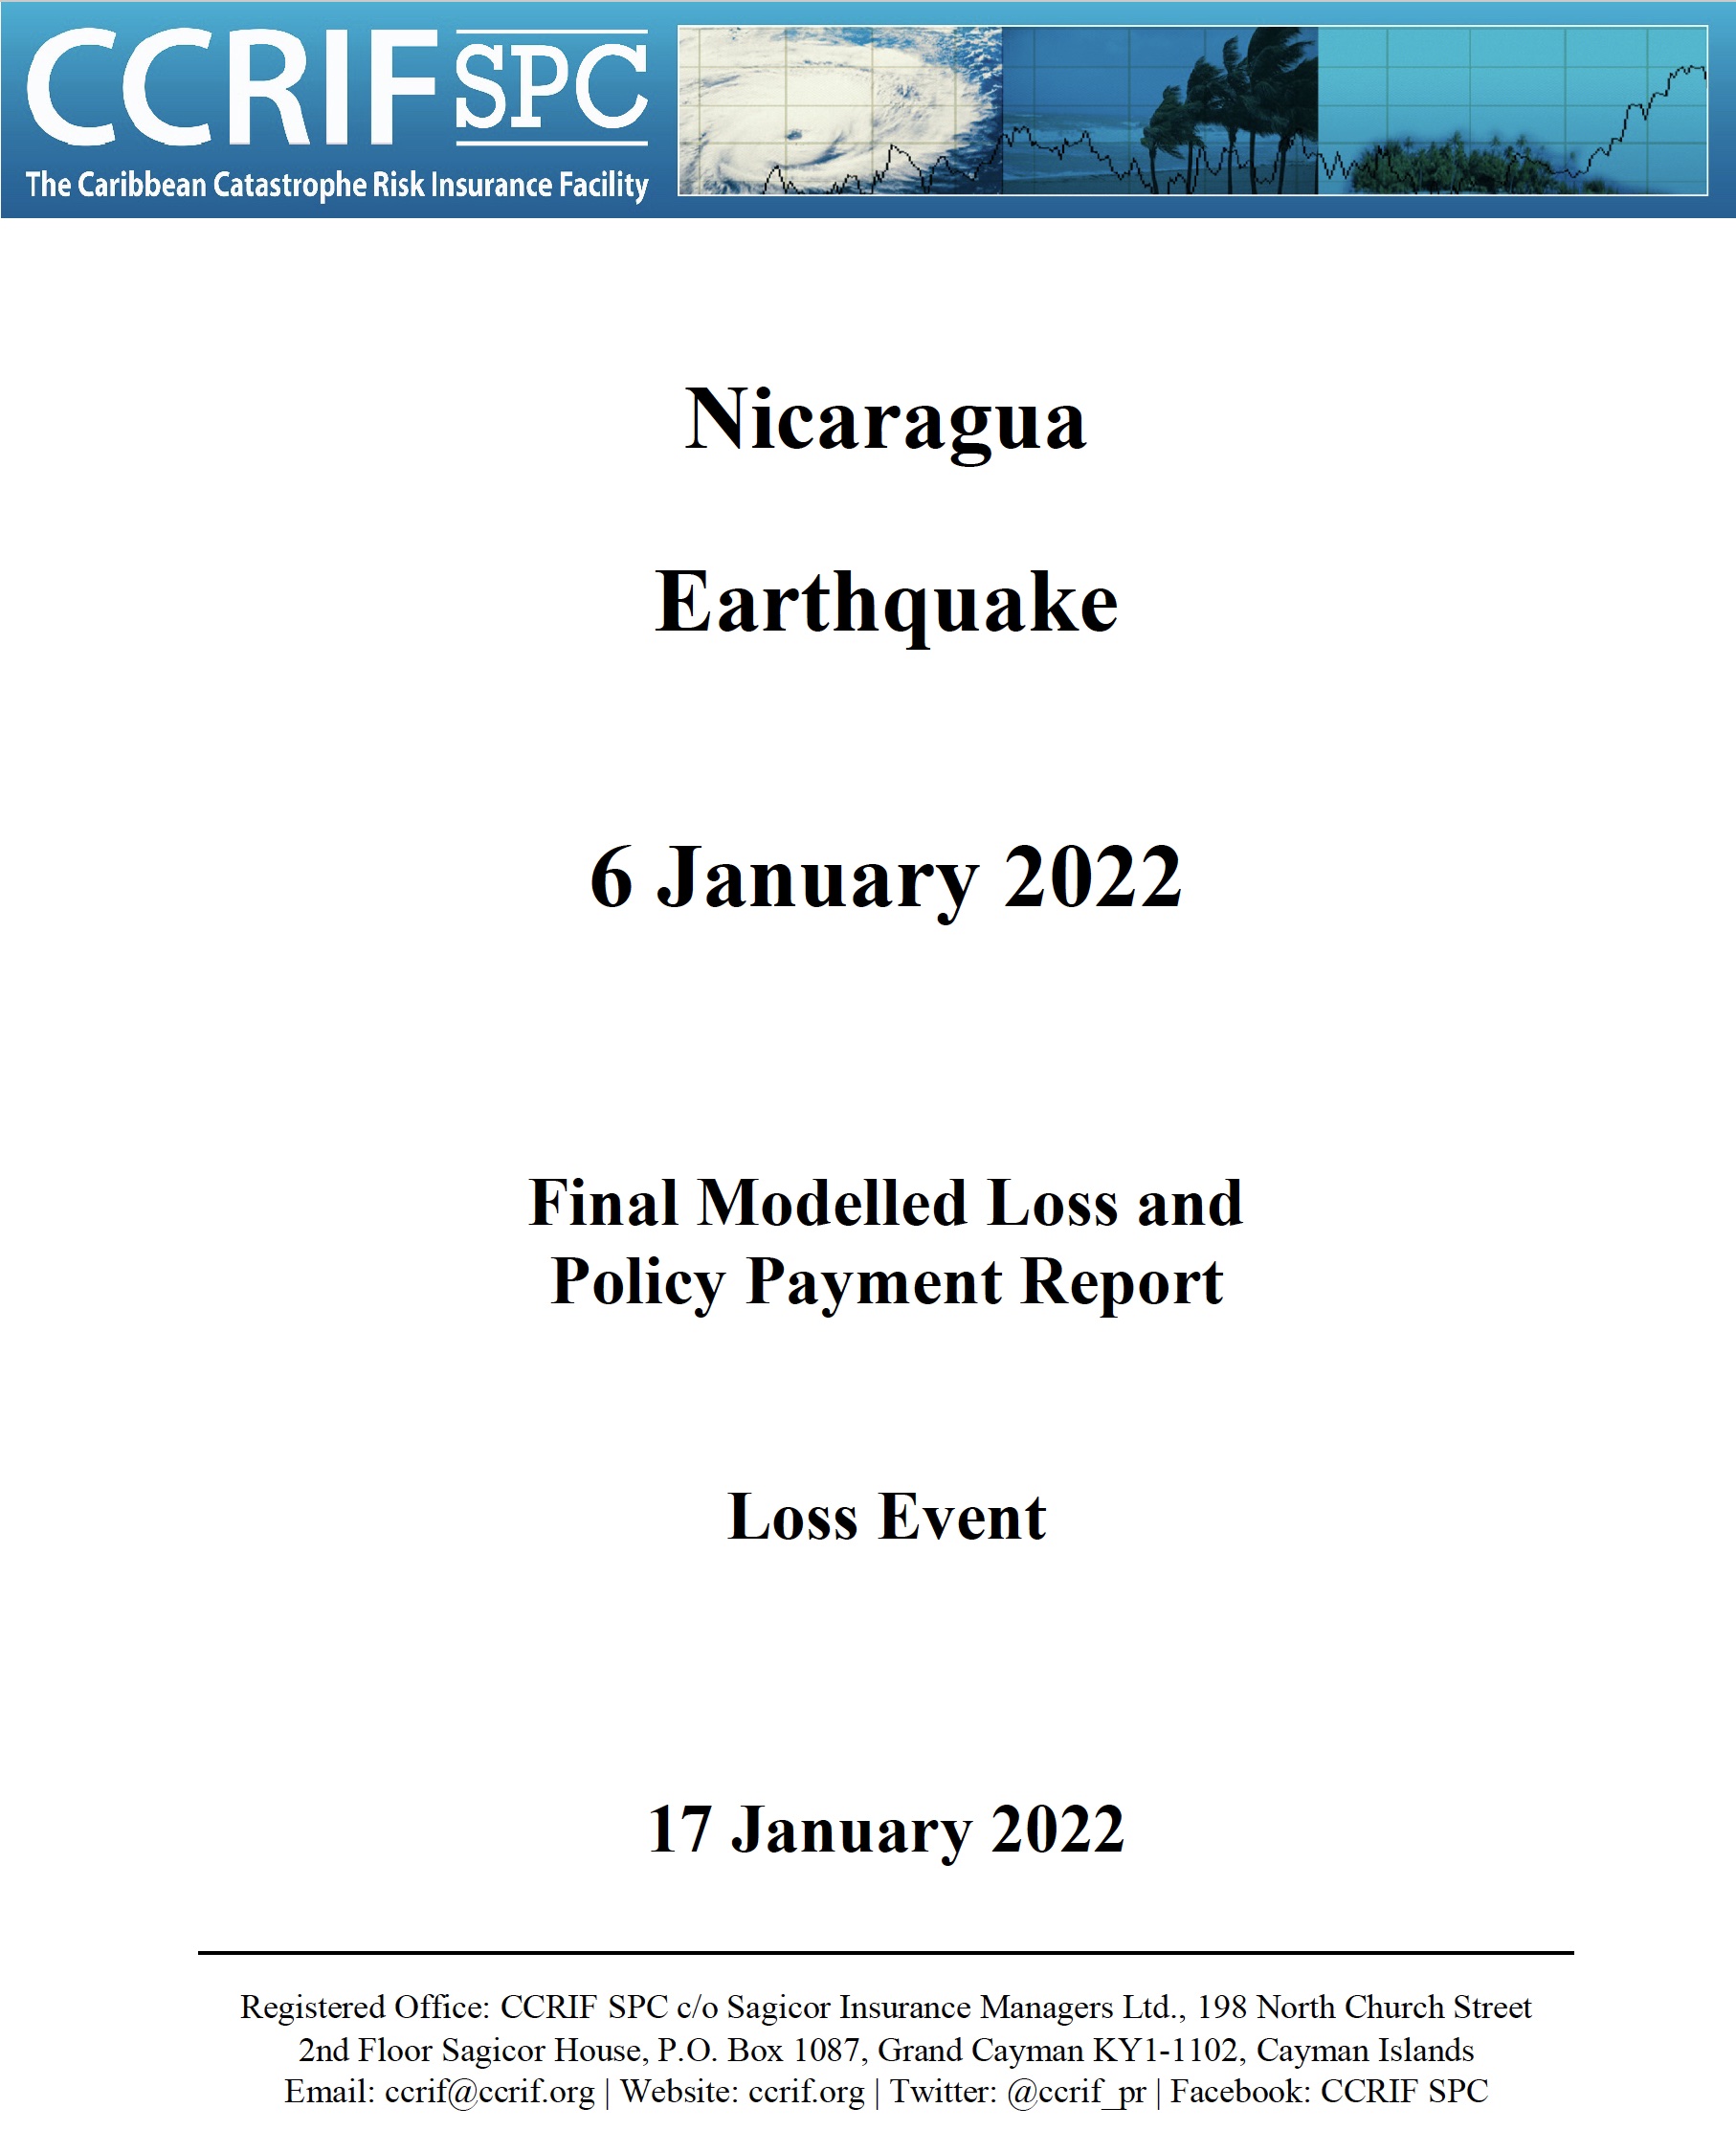 Final Modelled Loss and Policy Payment Report - Earthquake - Nicaragua - January 6 2022